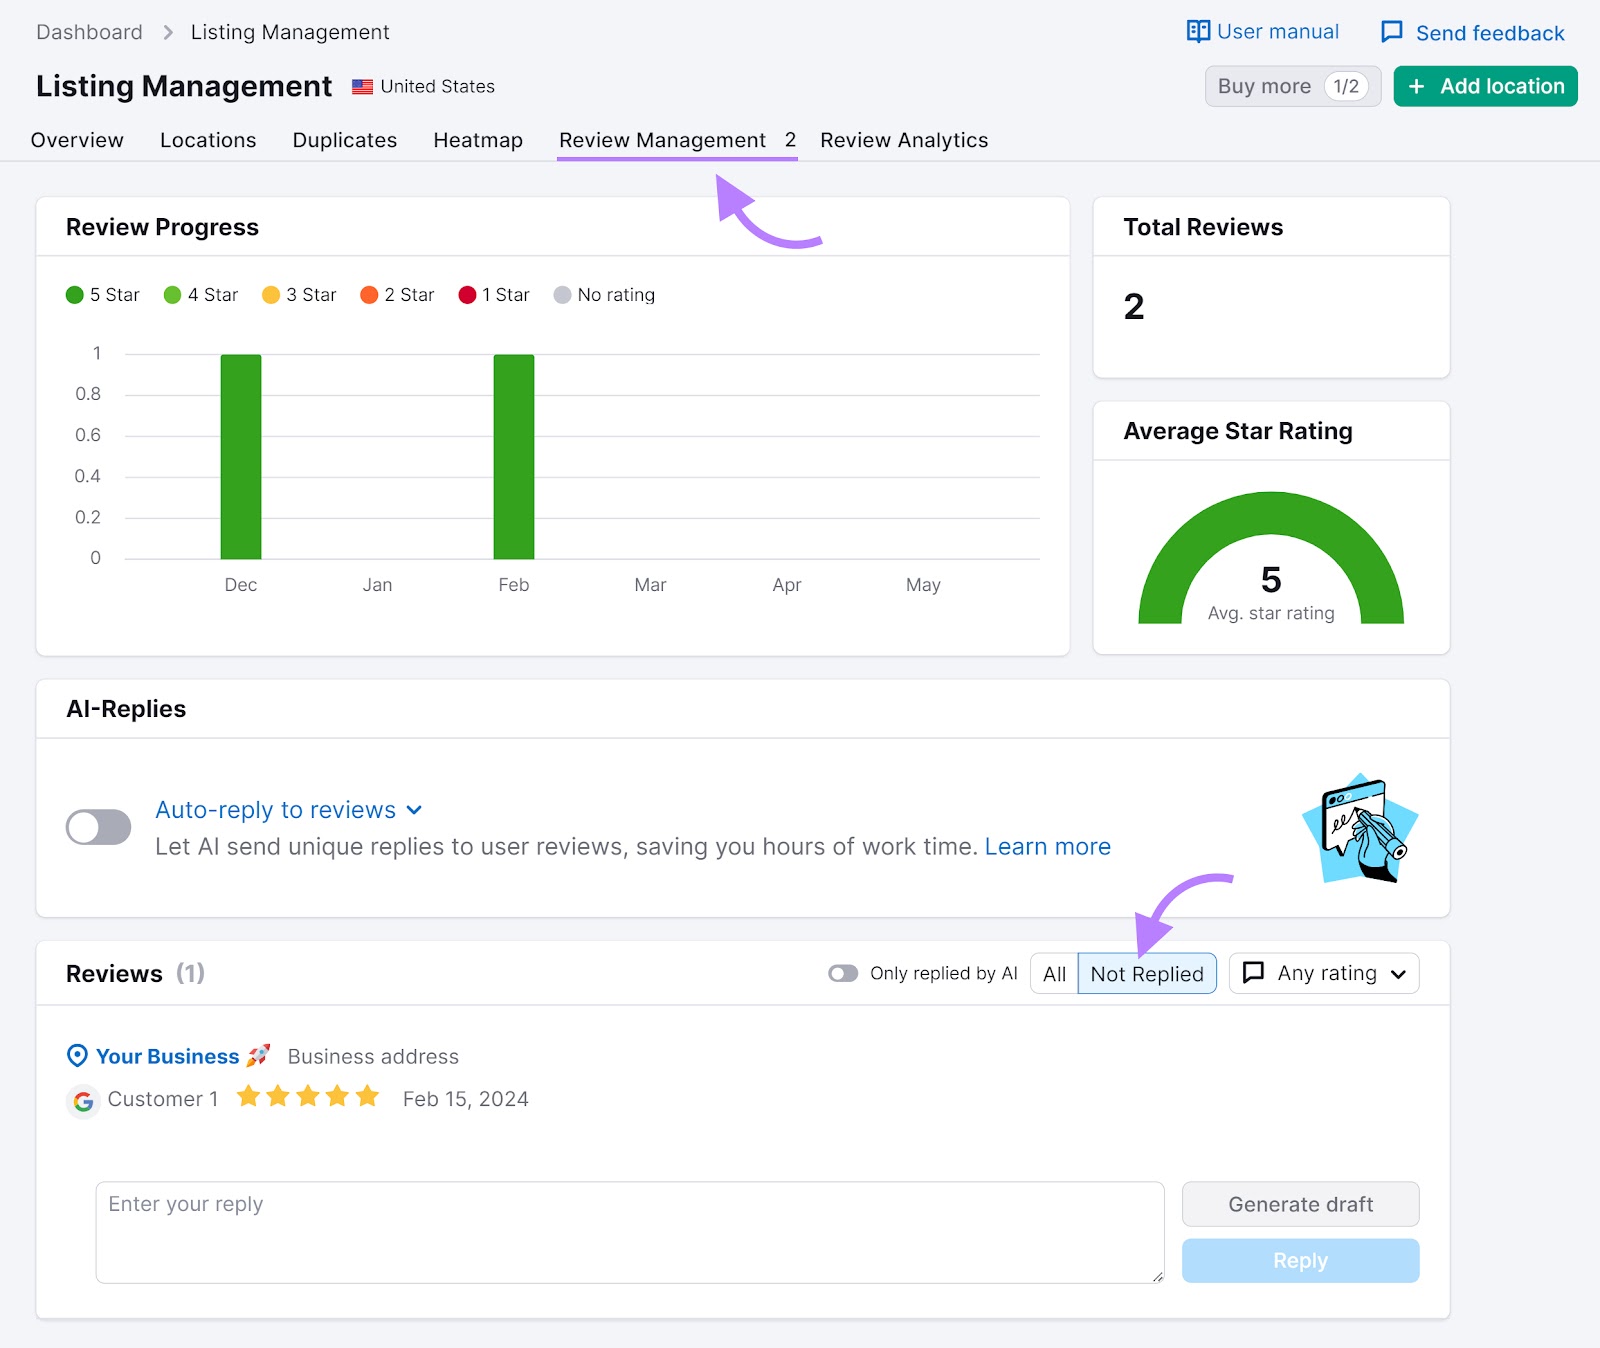 Listing Management tool "Review Management" tab with an arrow pointing to the "Not Replied" filter.